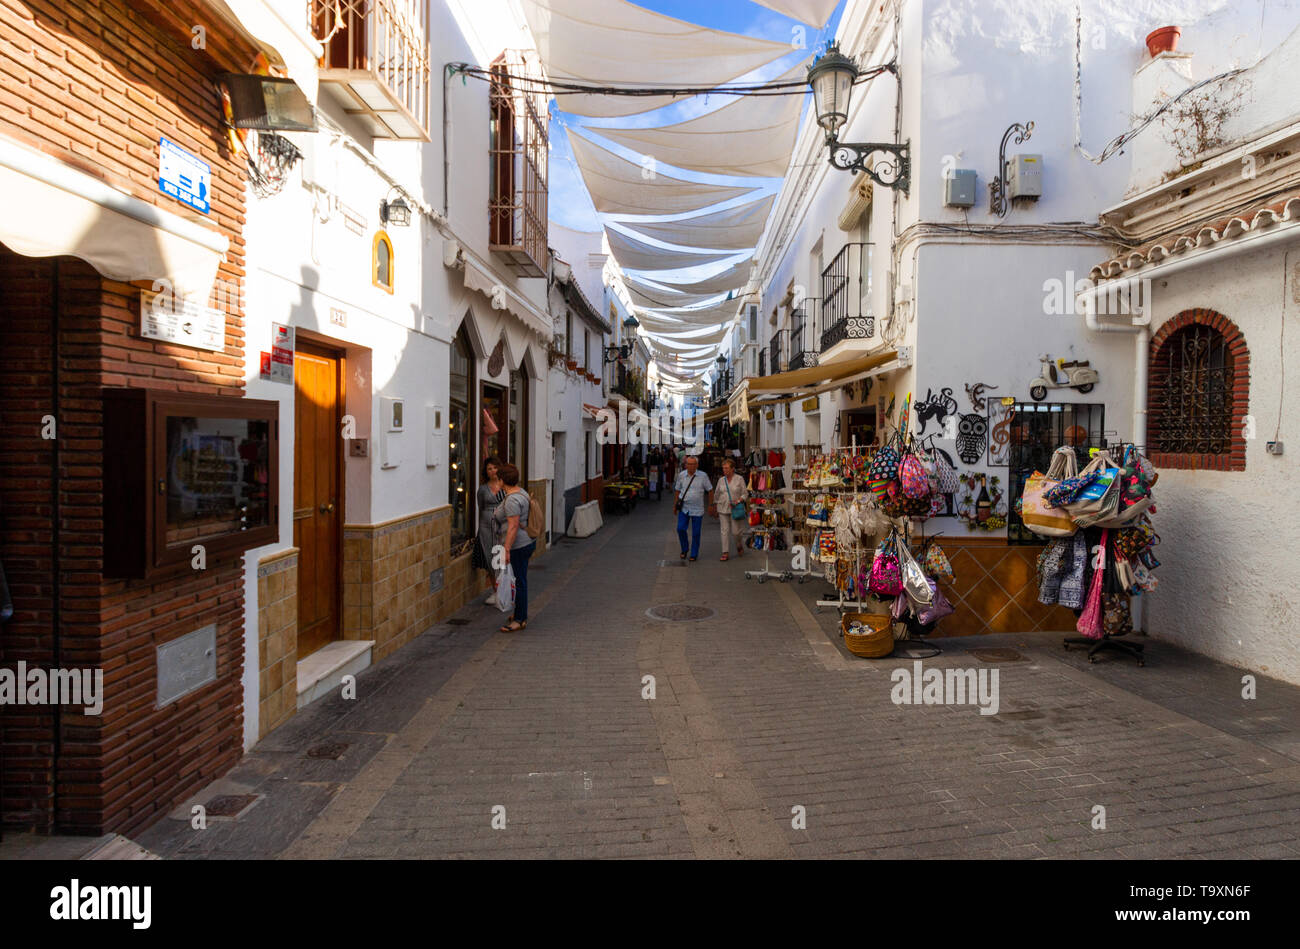 Nerja, Malaga, Andalusia, Spain, May 18 2019. A tradition narrow shopping street with shades high up between the buildings to block the sunlight Stock Photo